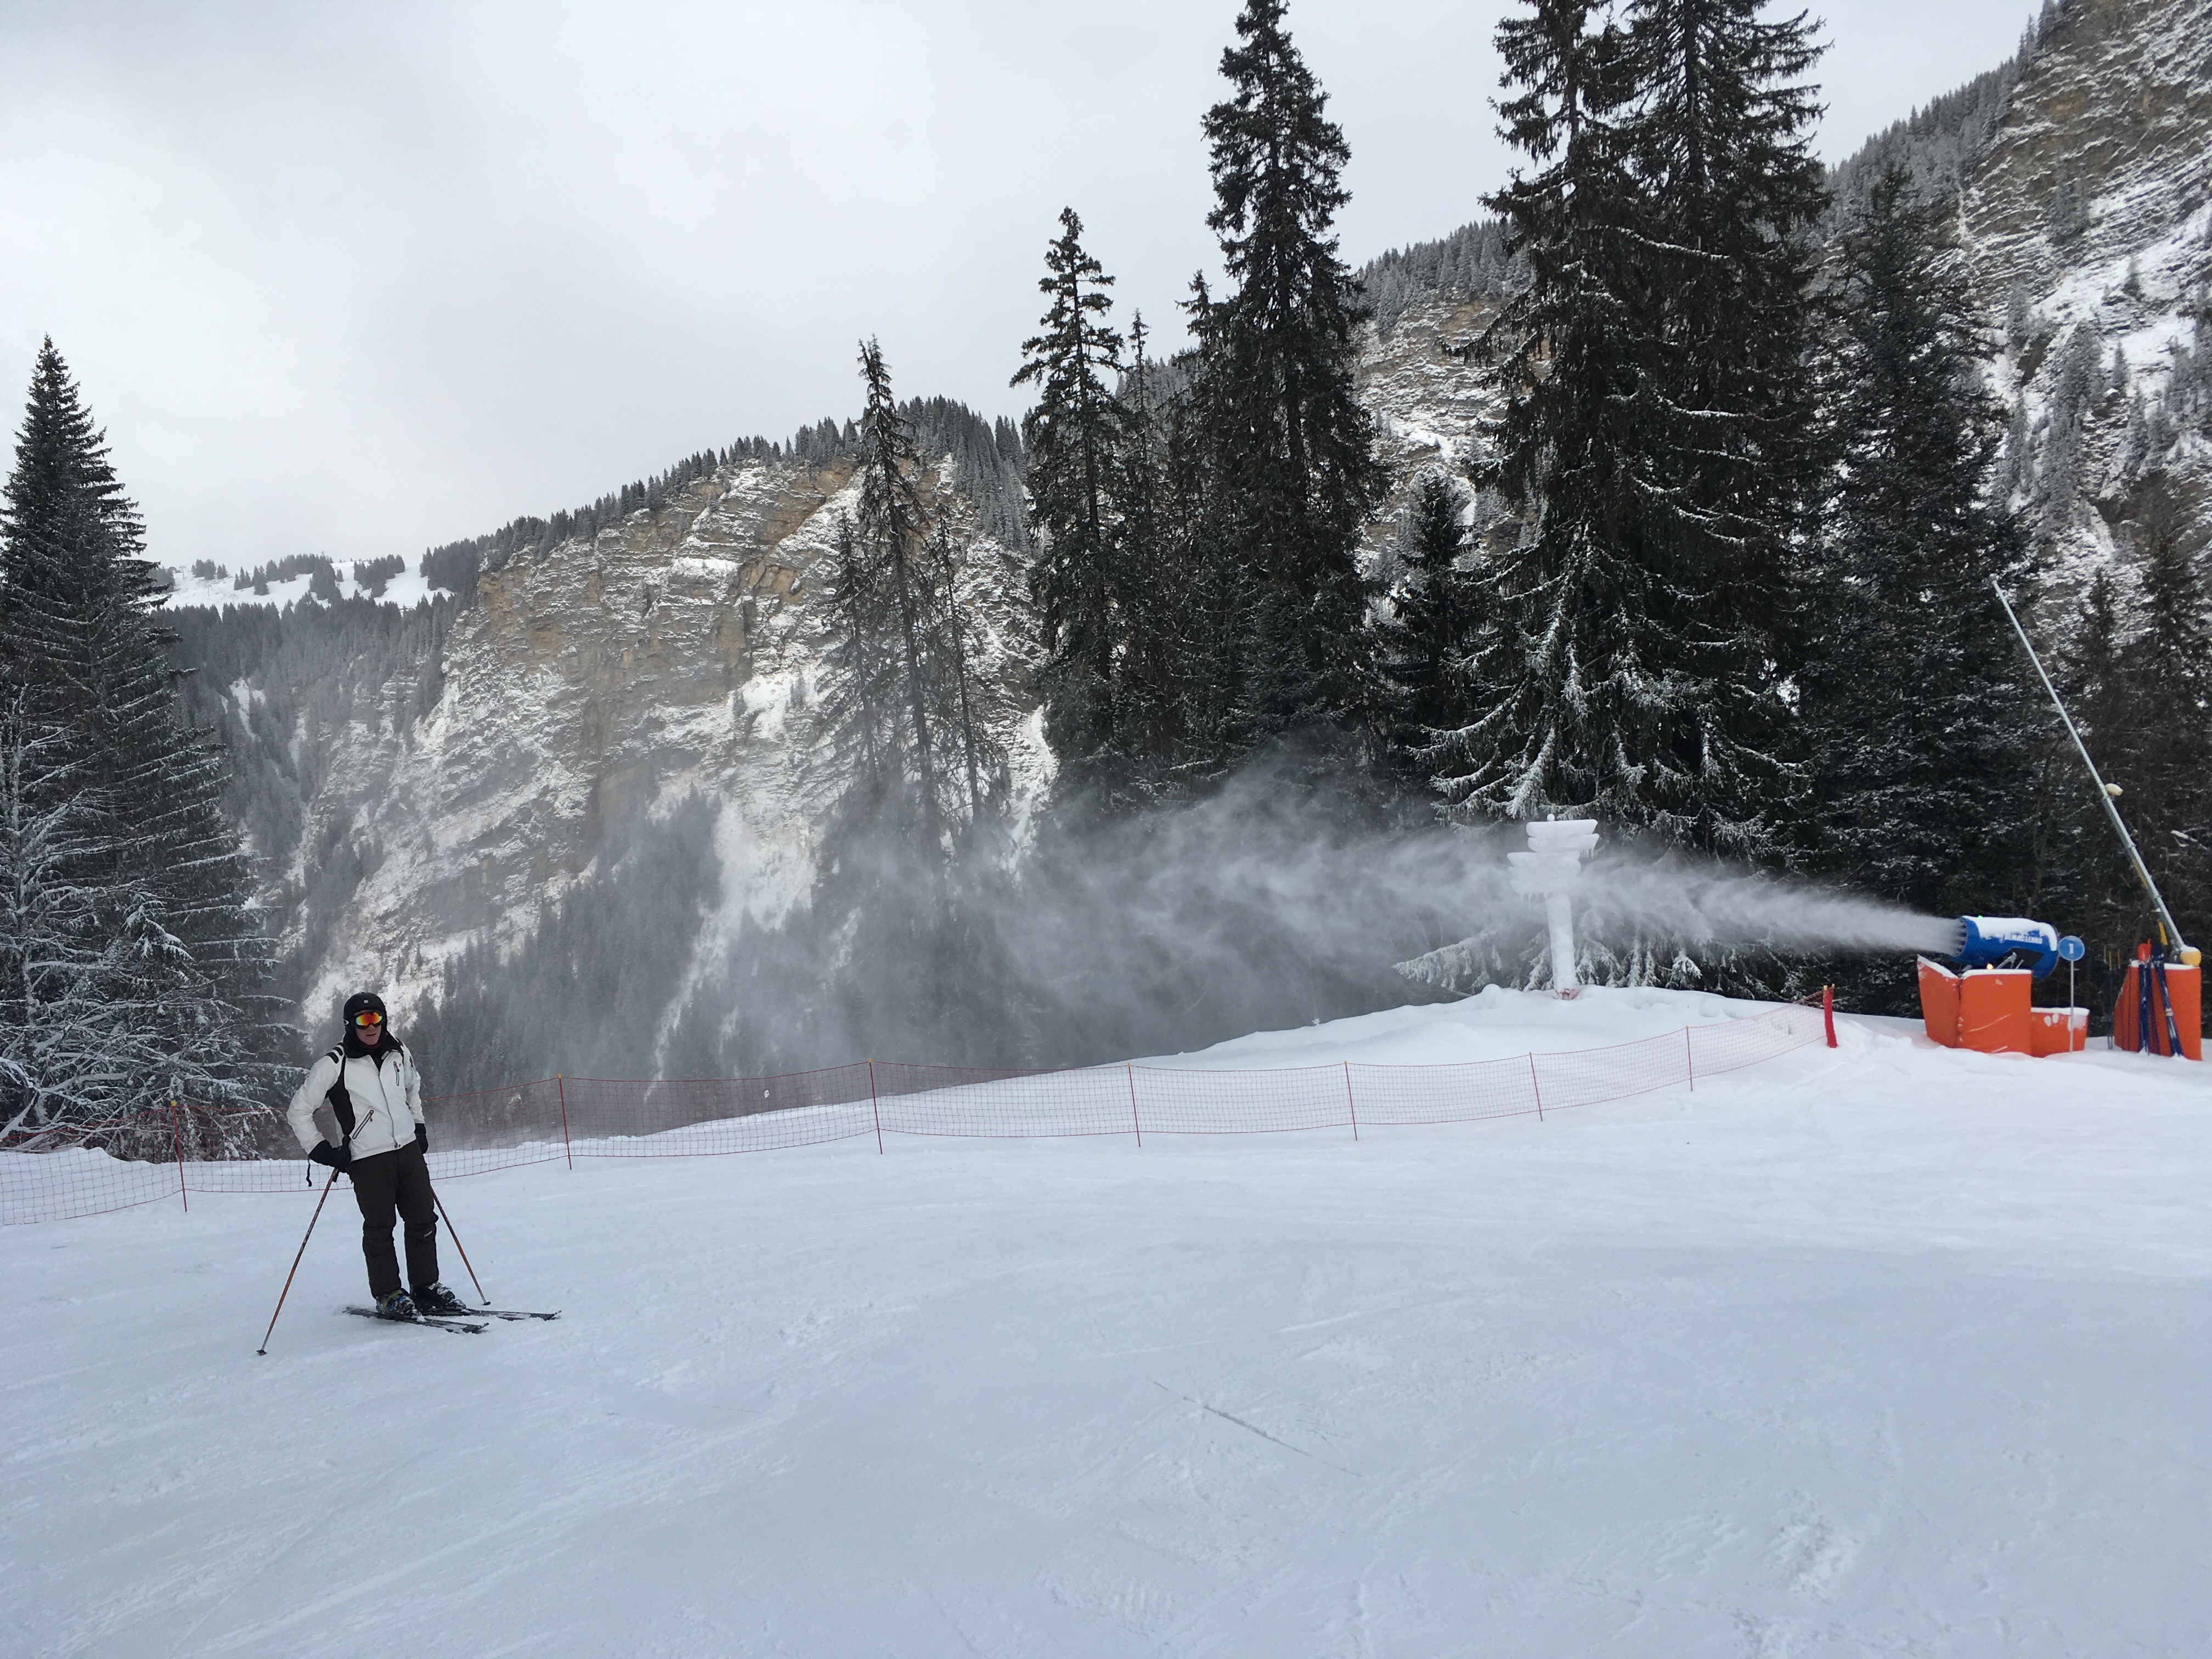 Snow cannon in action in Avoriaz, France